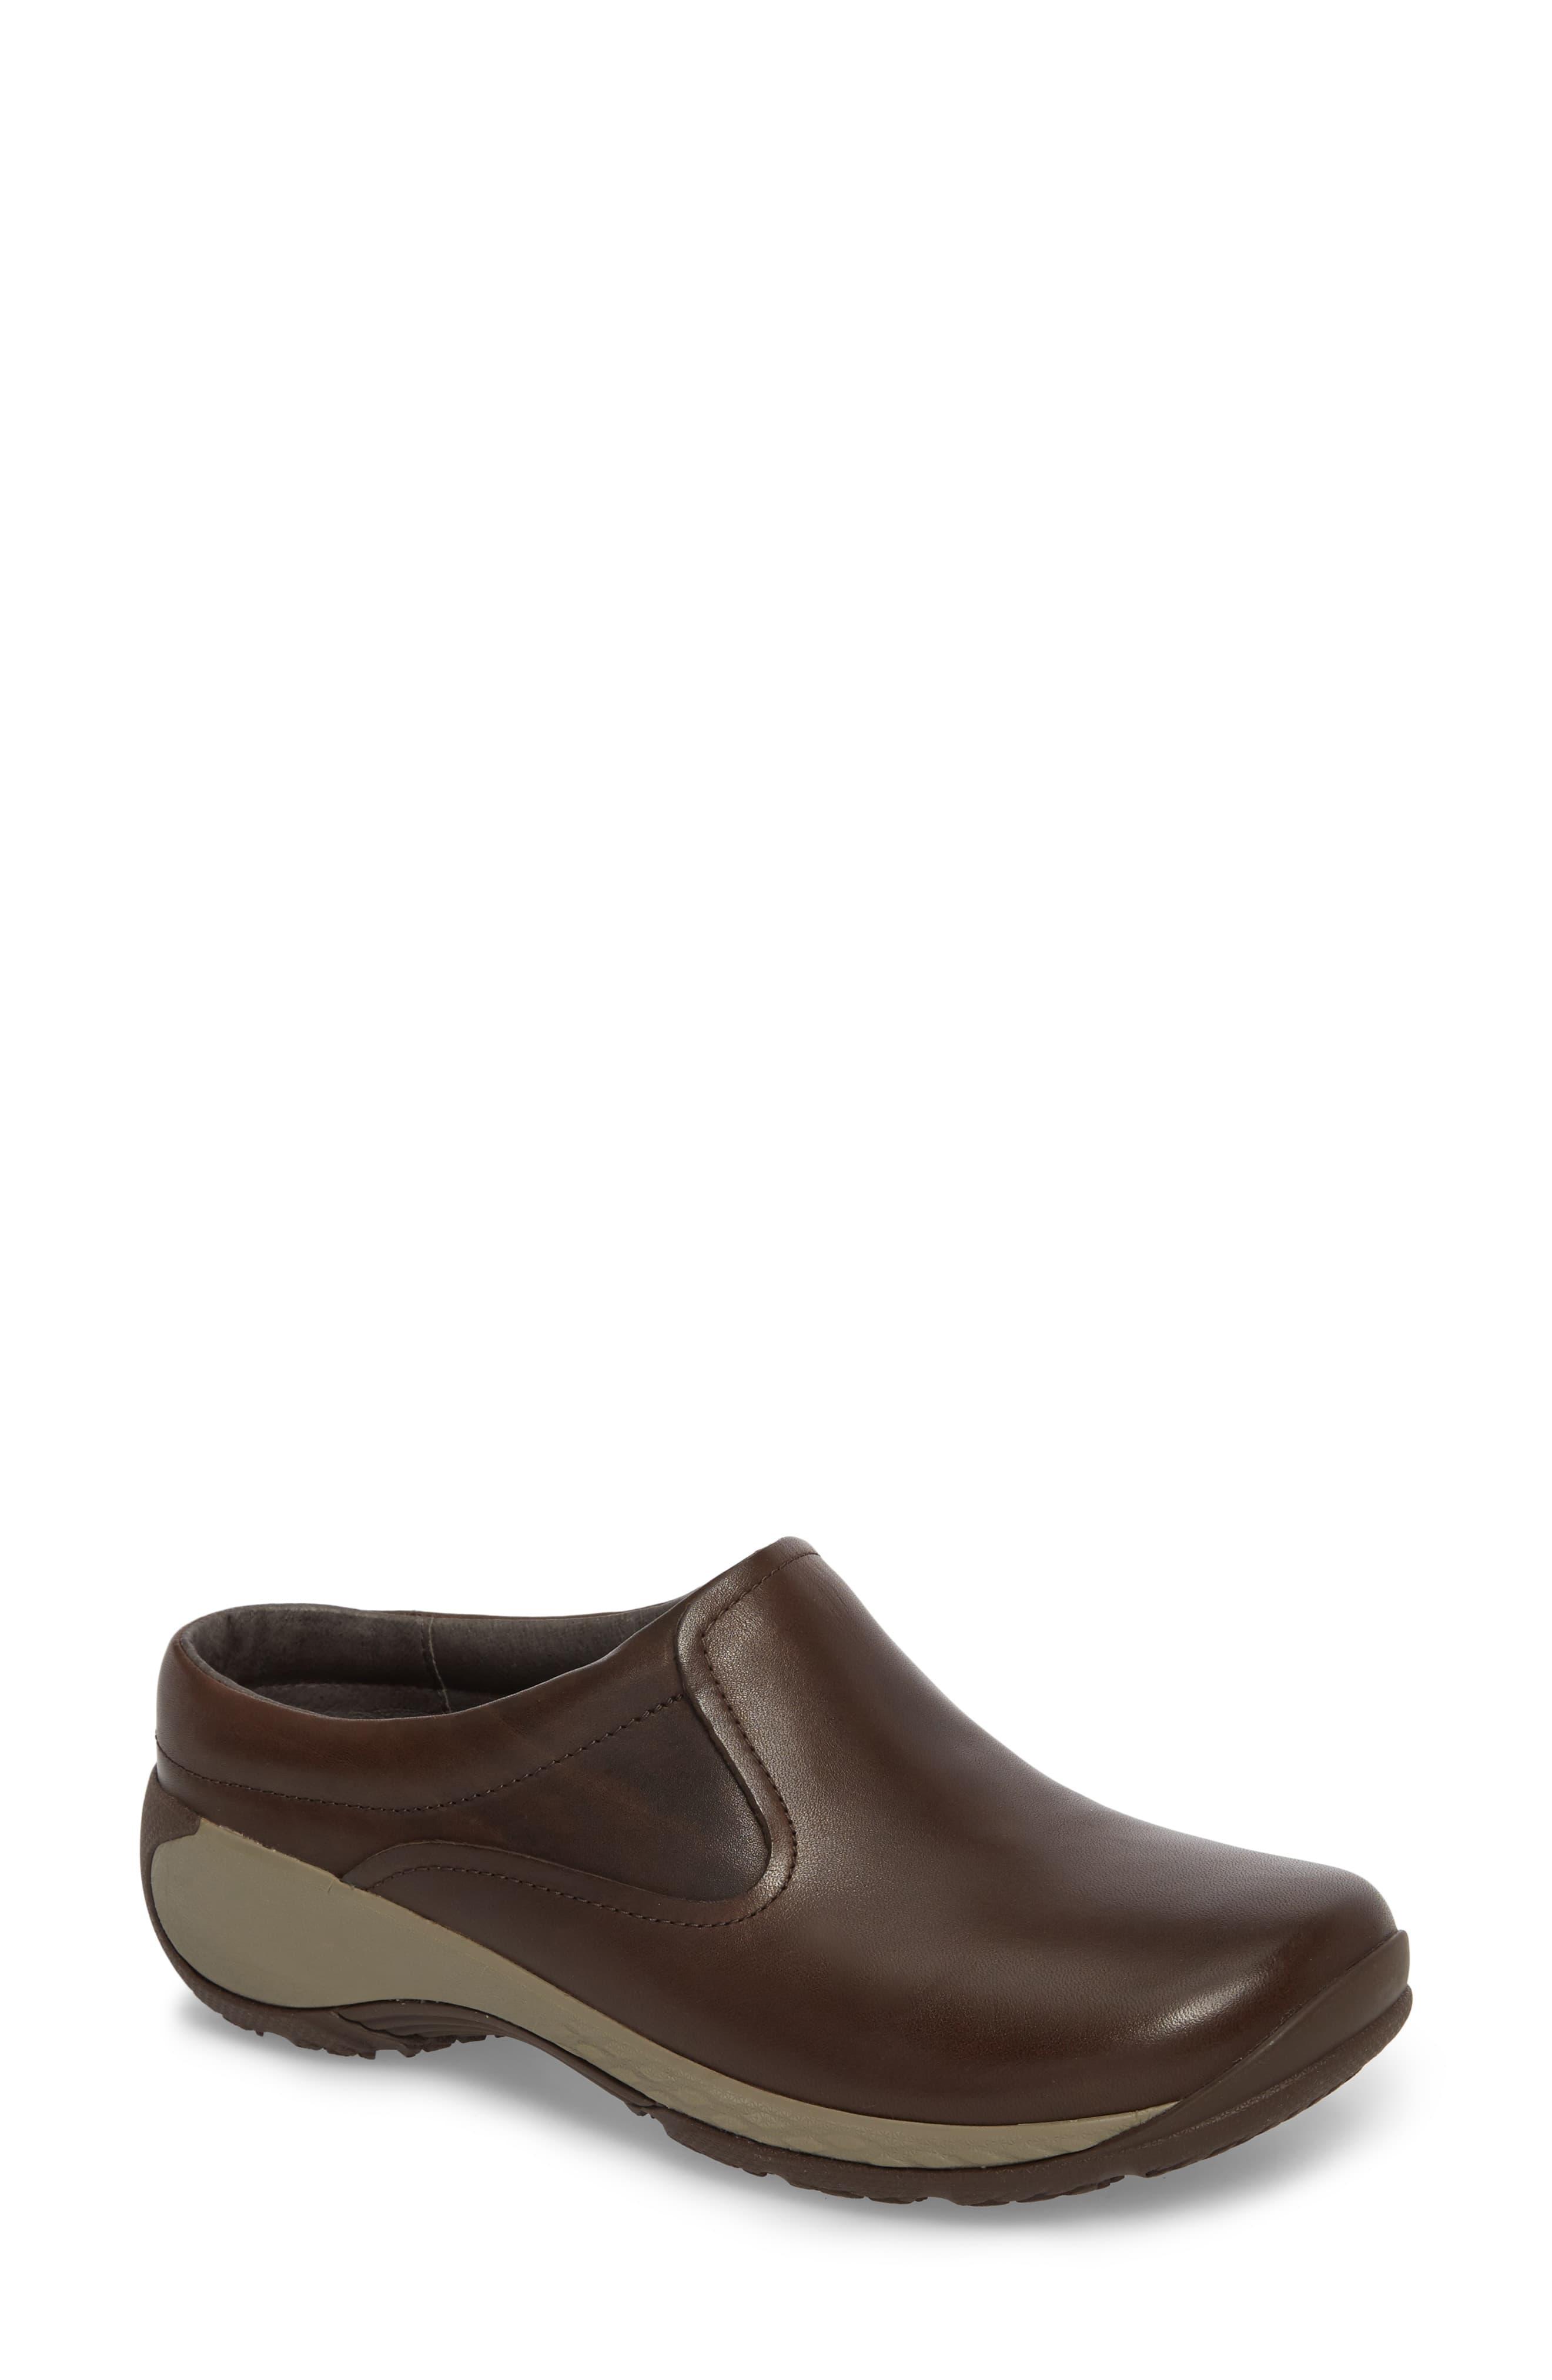 Merrell Encore Q2 Clog in Espresso Leather (Brown) - Save 29% - Lyst